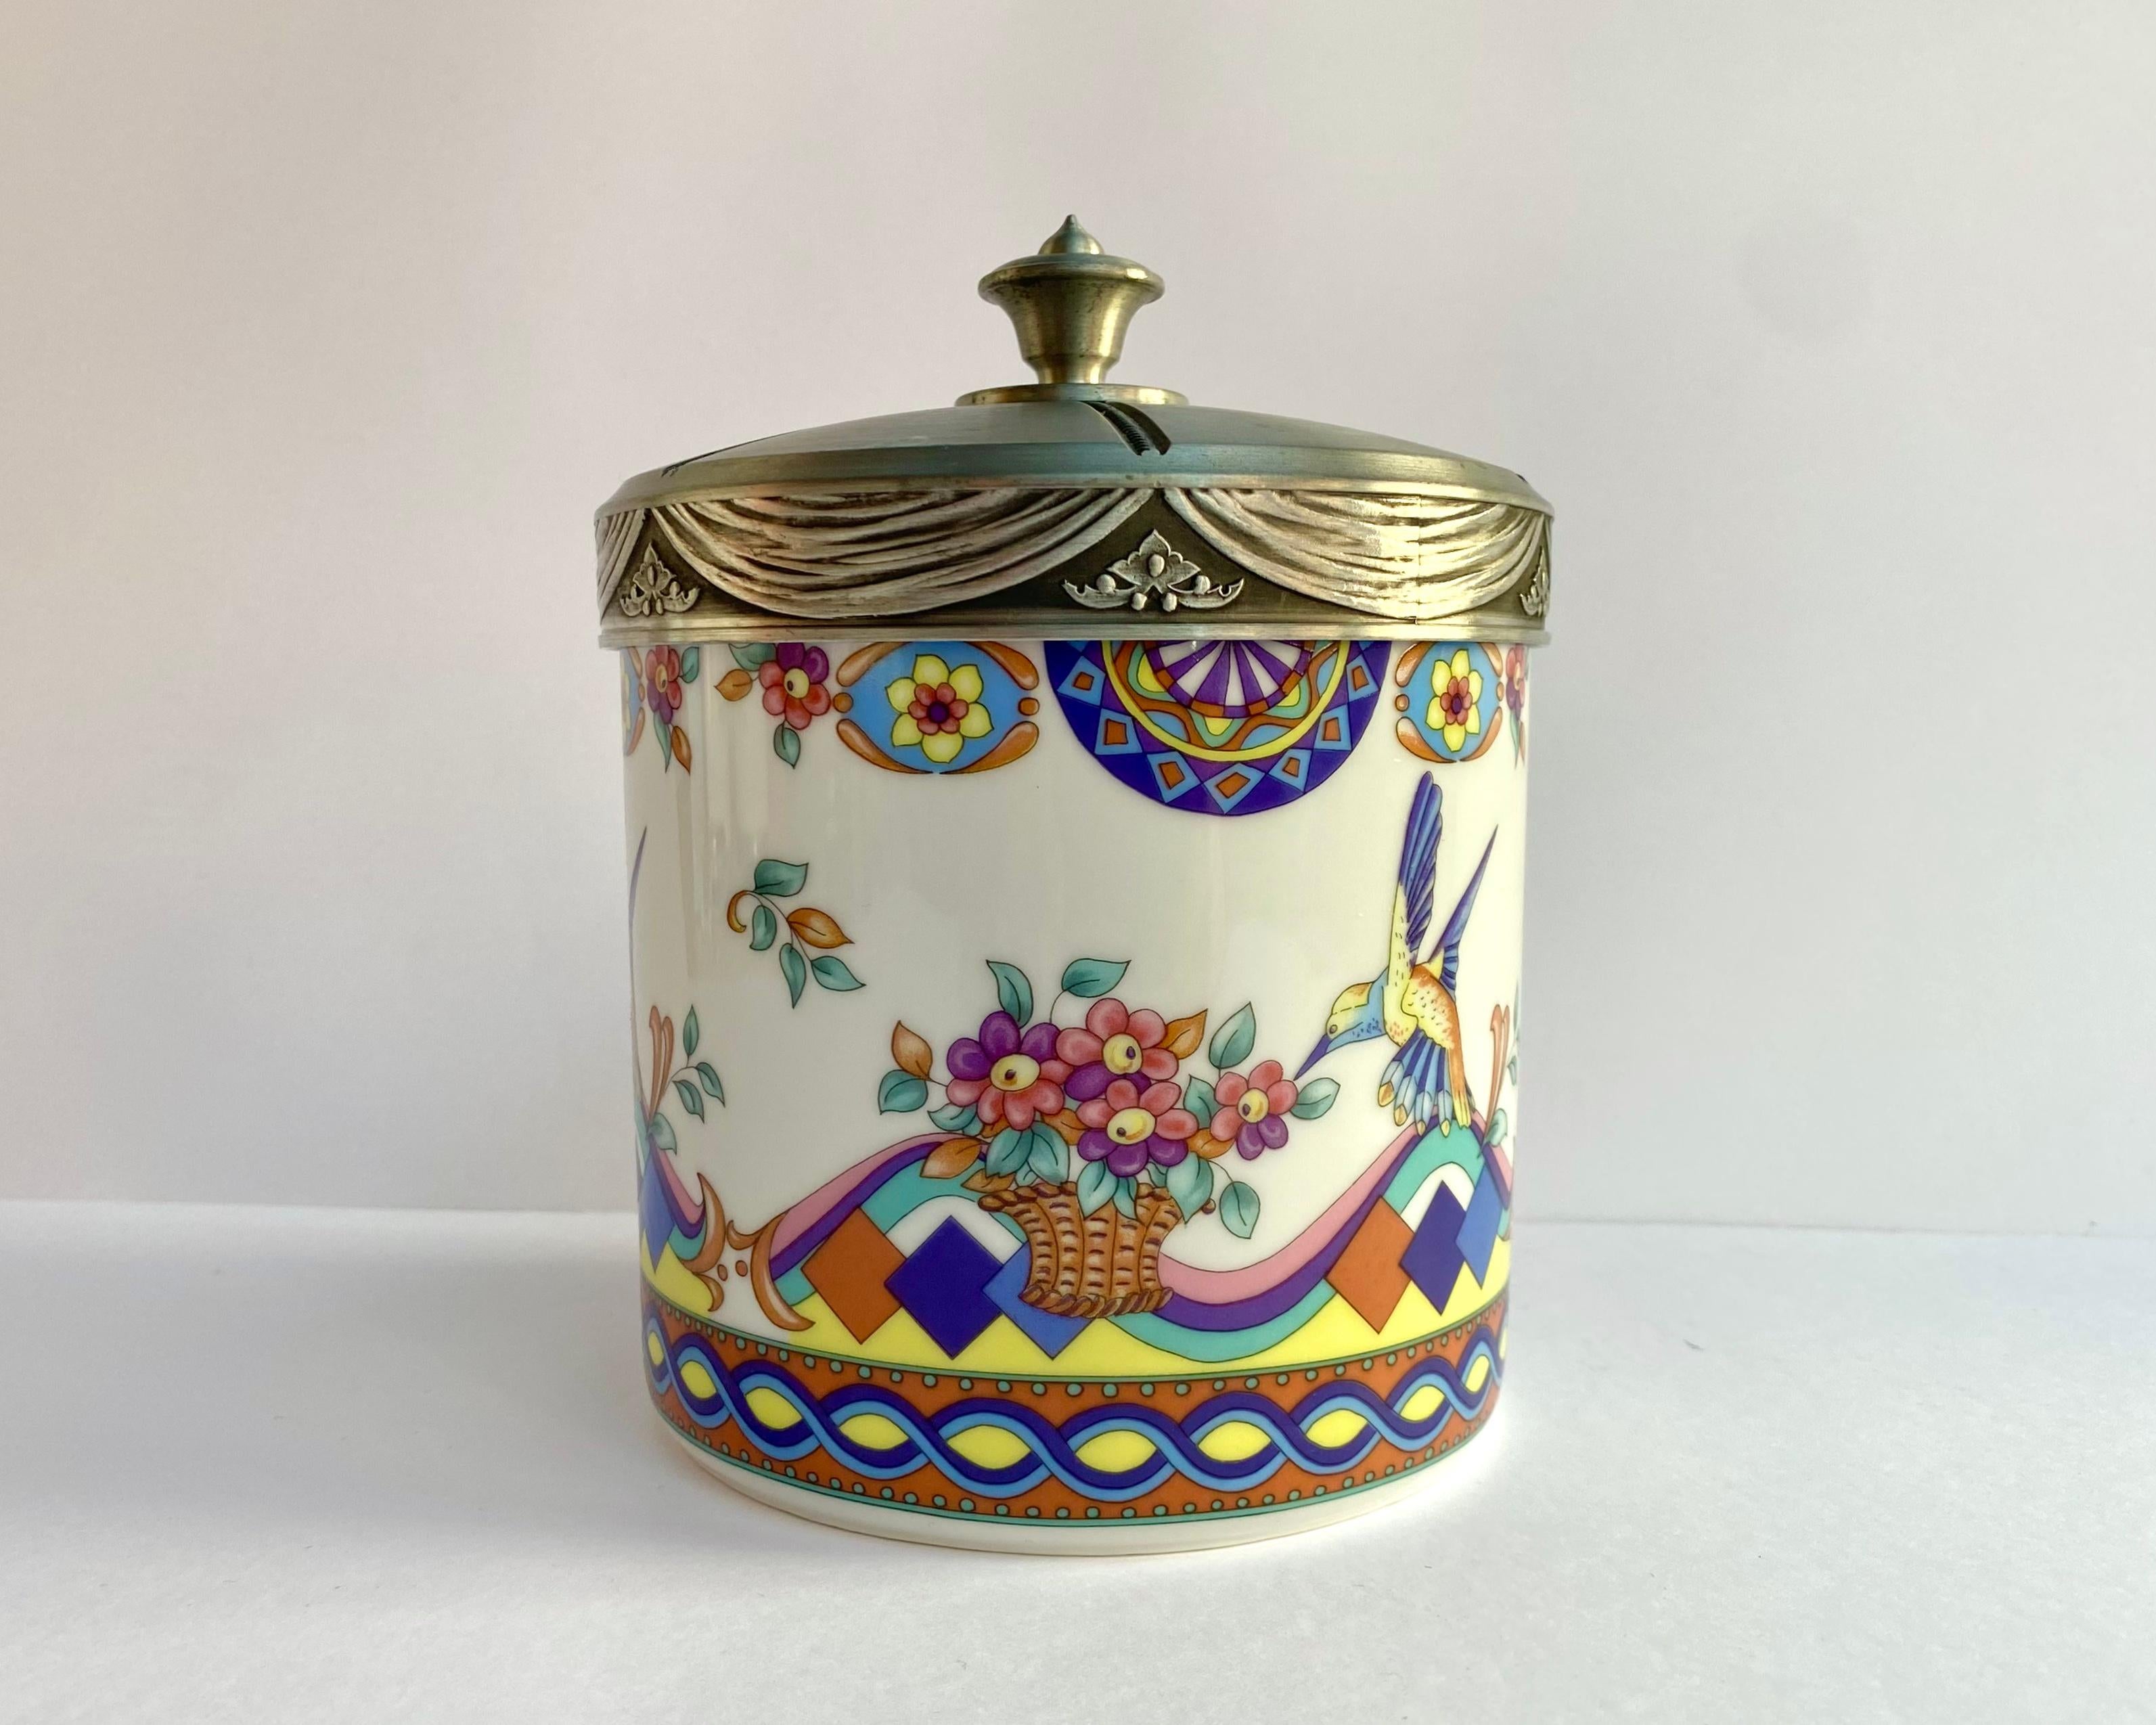 A very colorful Vintage Floral Biscuit Tin In Porcelain with tin lead  by Seltmann Weiden, from Germany, hummingbird and flower pattern dates from the 1995.

What a great gift for a tin collector.

Opens and closes tightly.

A porcelain container